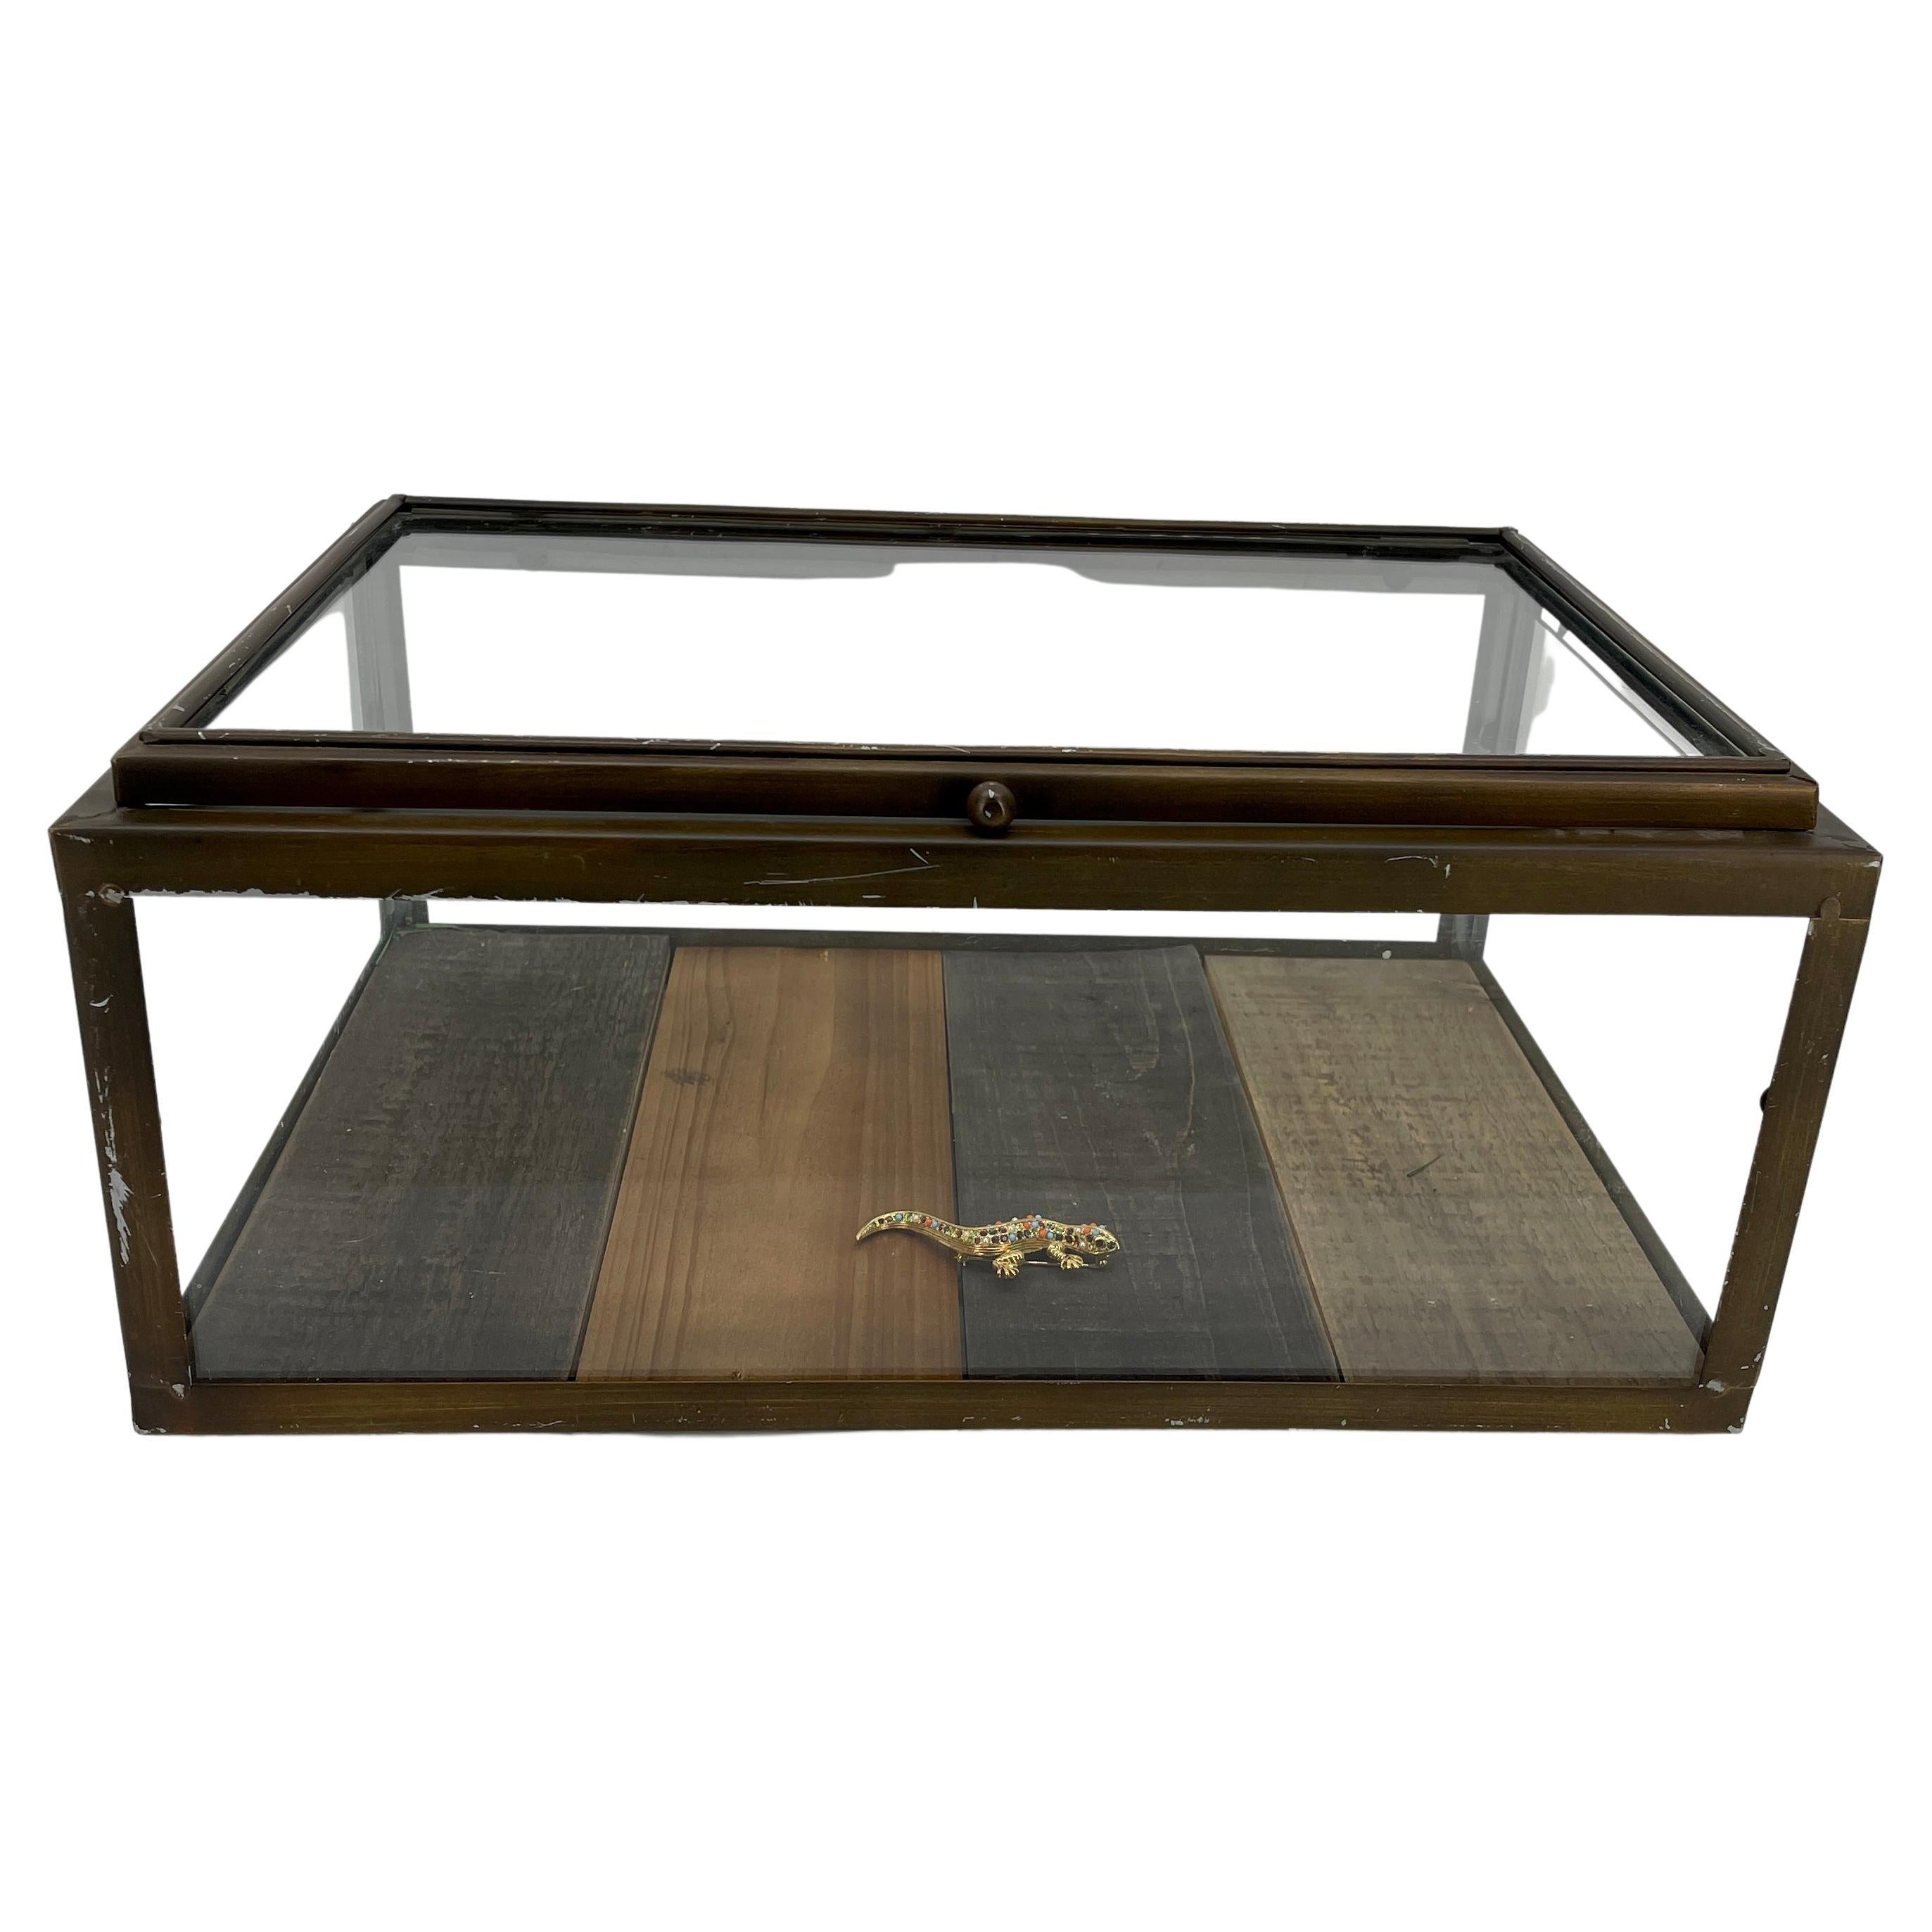 Small rectangular table display case vitrine for showcasing smalls.
The case opens with the top lifting upwards.
The worn out base has been replaced with 4 pieces.